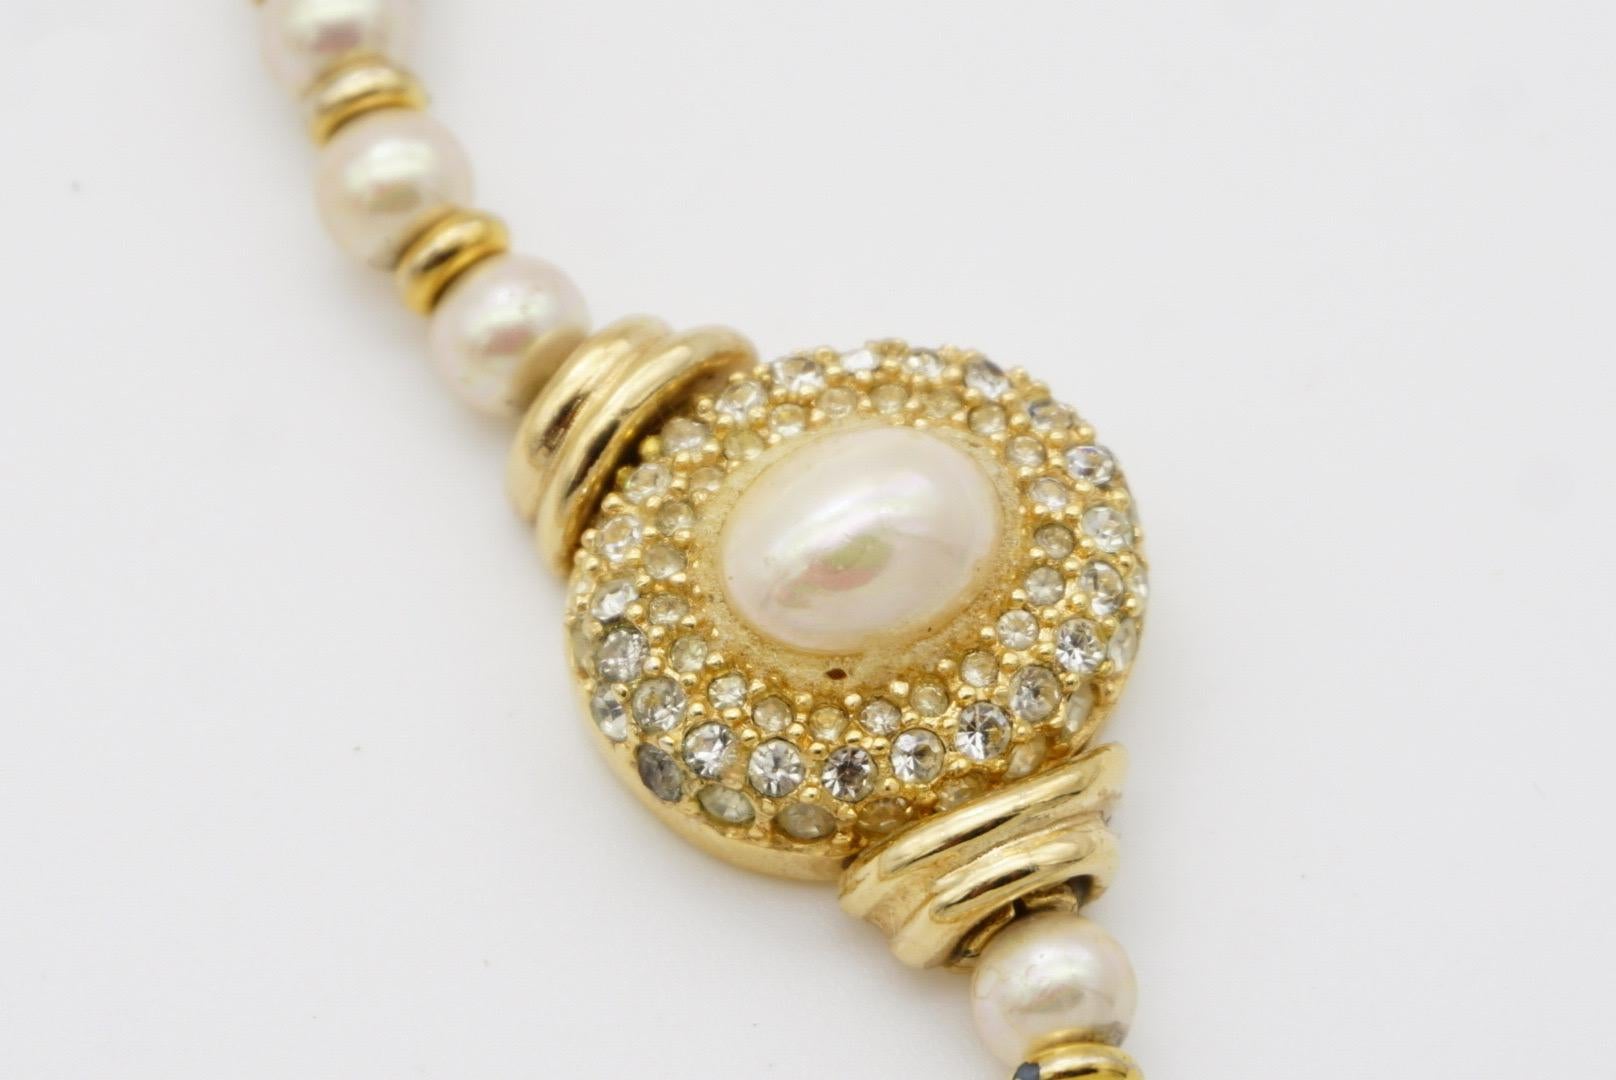 Christian Dior GROSSE 1960s White Oval Crystals Pendant Beaded Pearls Necklace For Sale 9